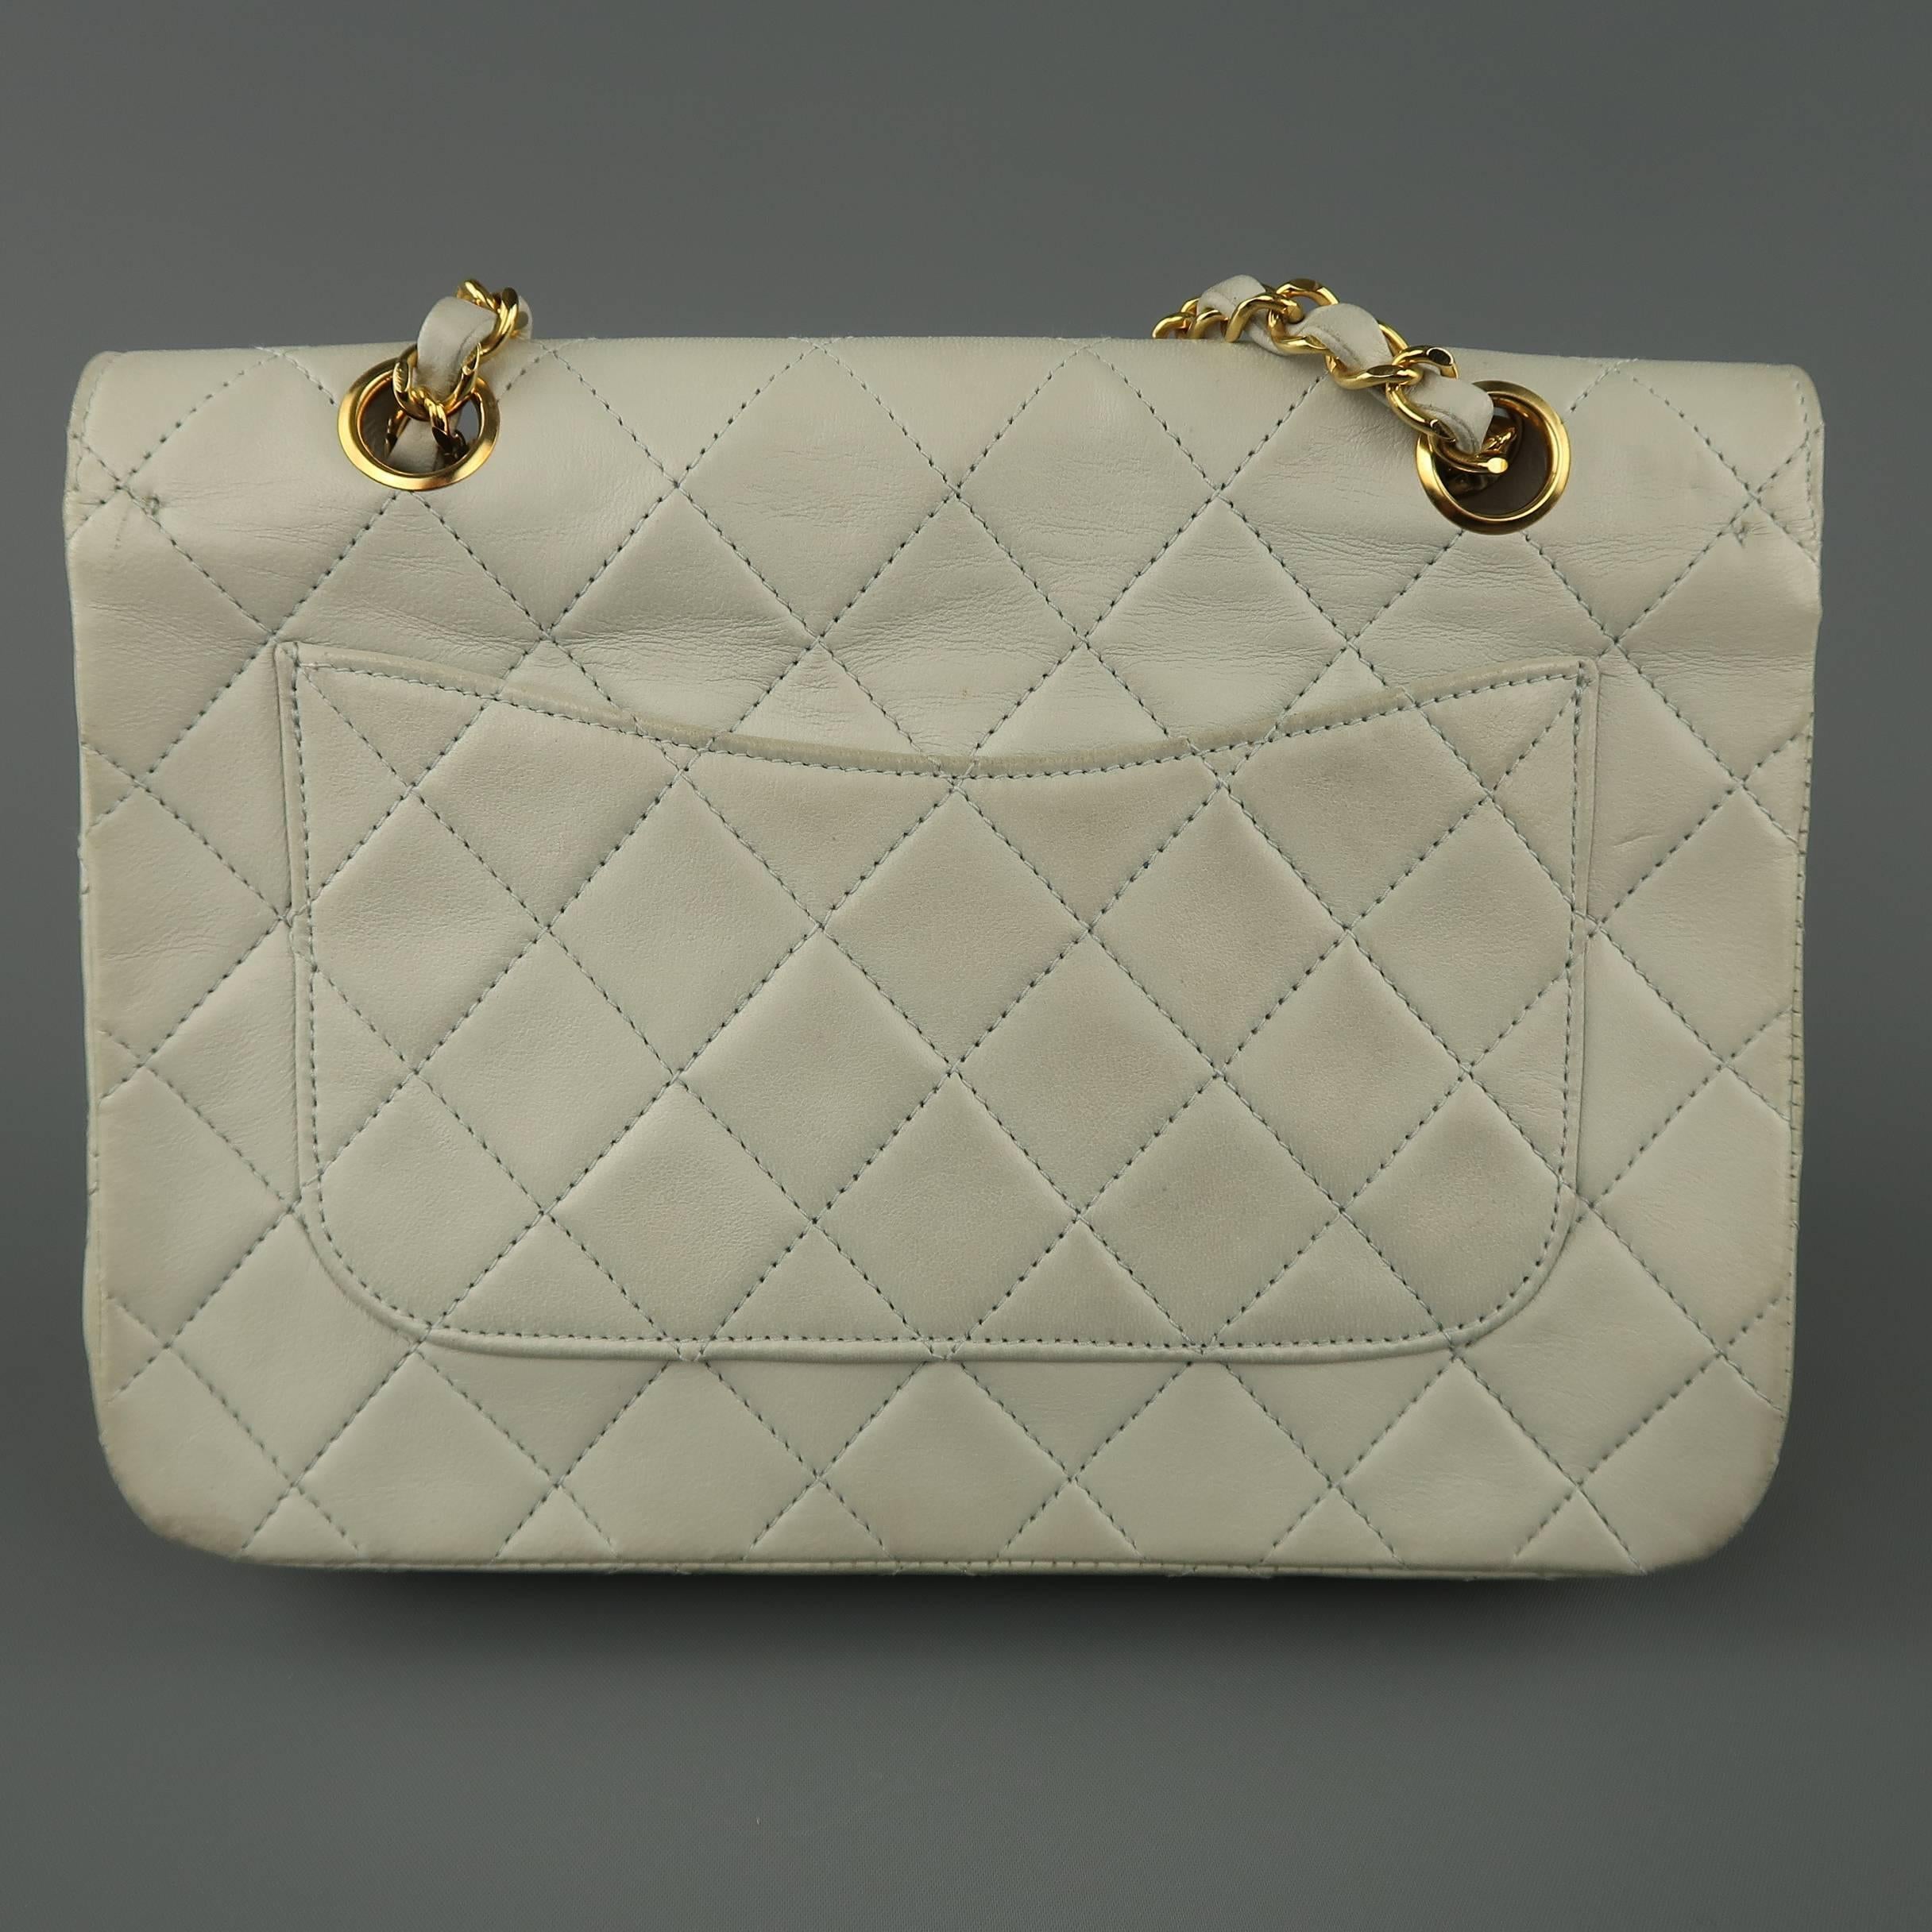 Women's Chanel Pastel Blue Vintage Quilted Leather Gold Chain Handbag